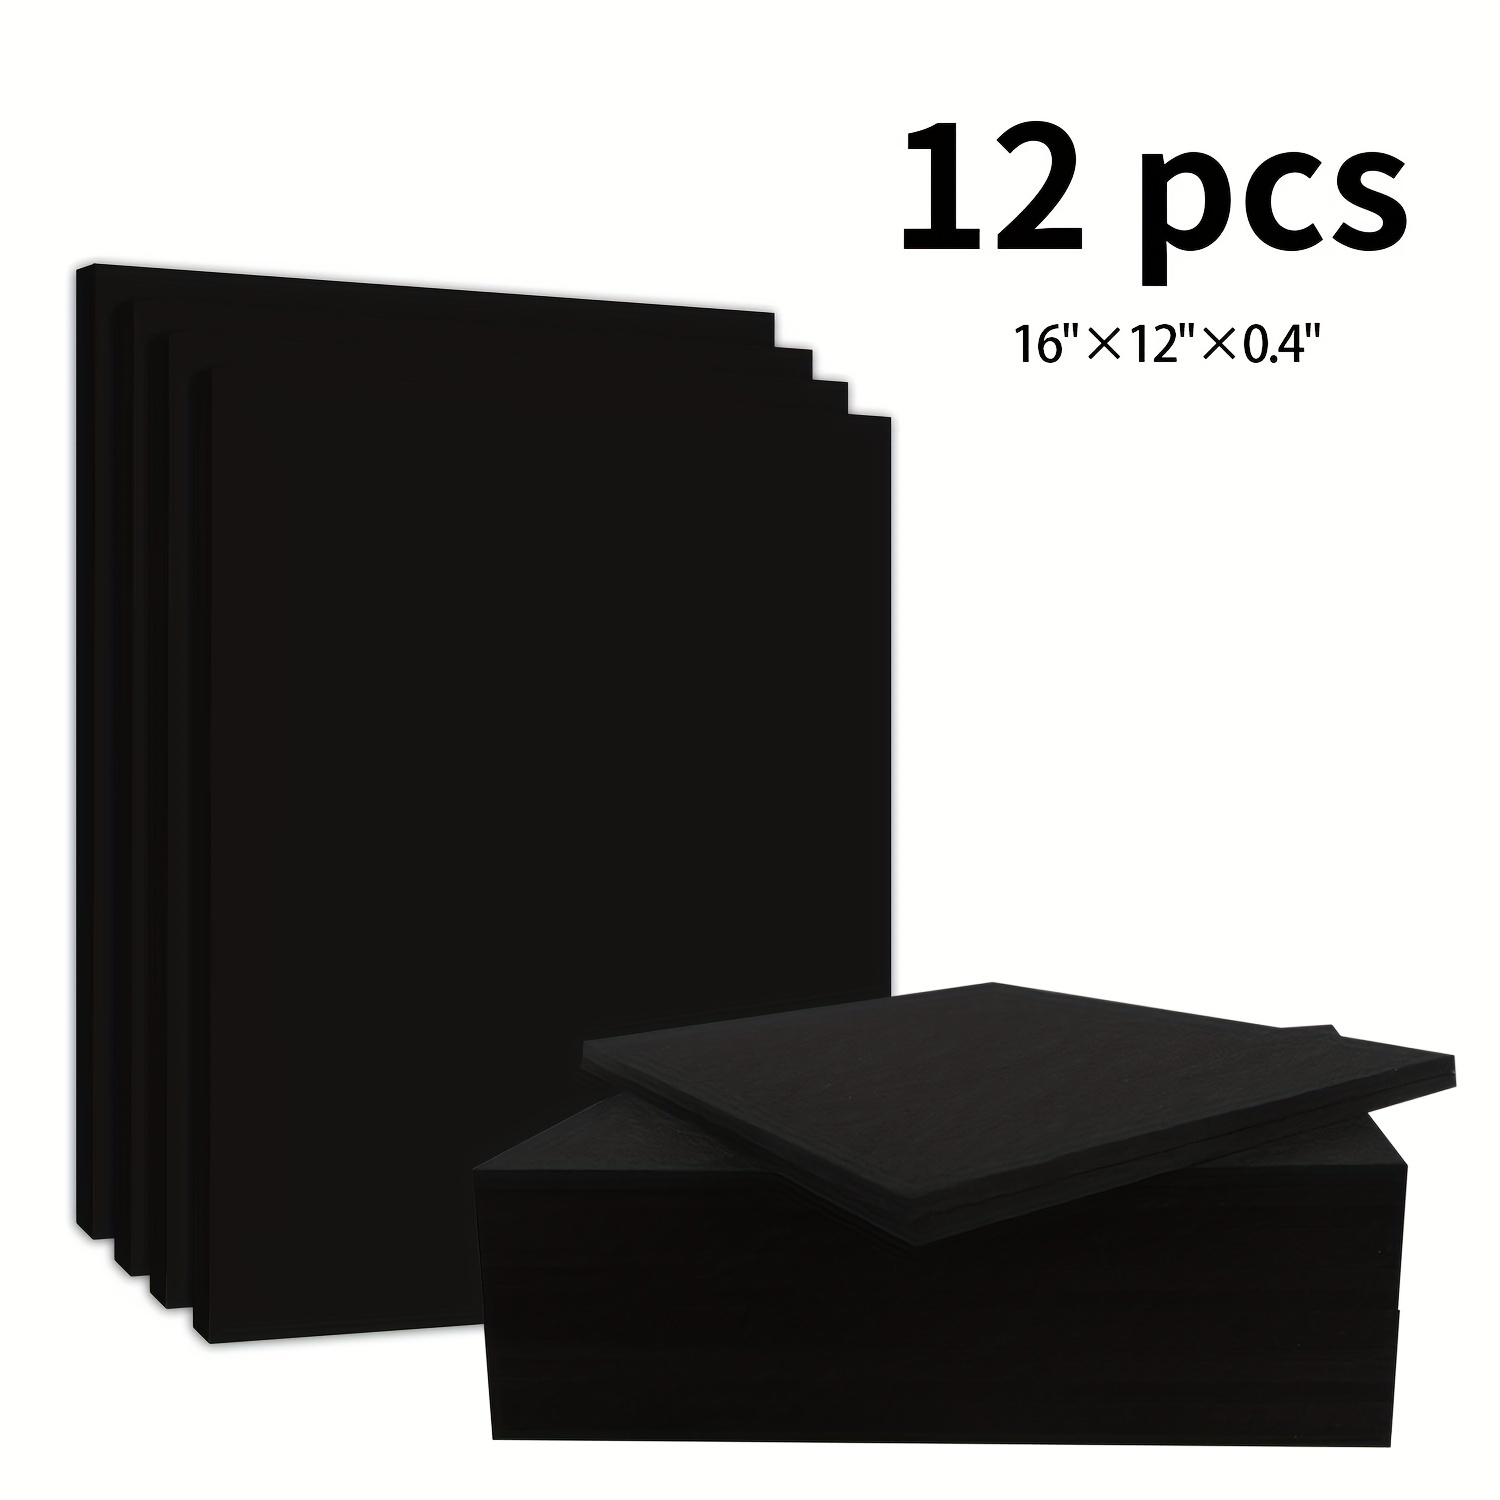 12 packs acoustic panels non self adhesive soundproof insulation panel sound absorbing noise reduction pads sound reducing foam for office door walls black